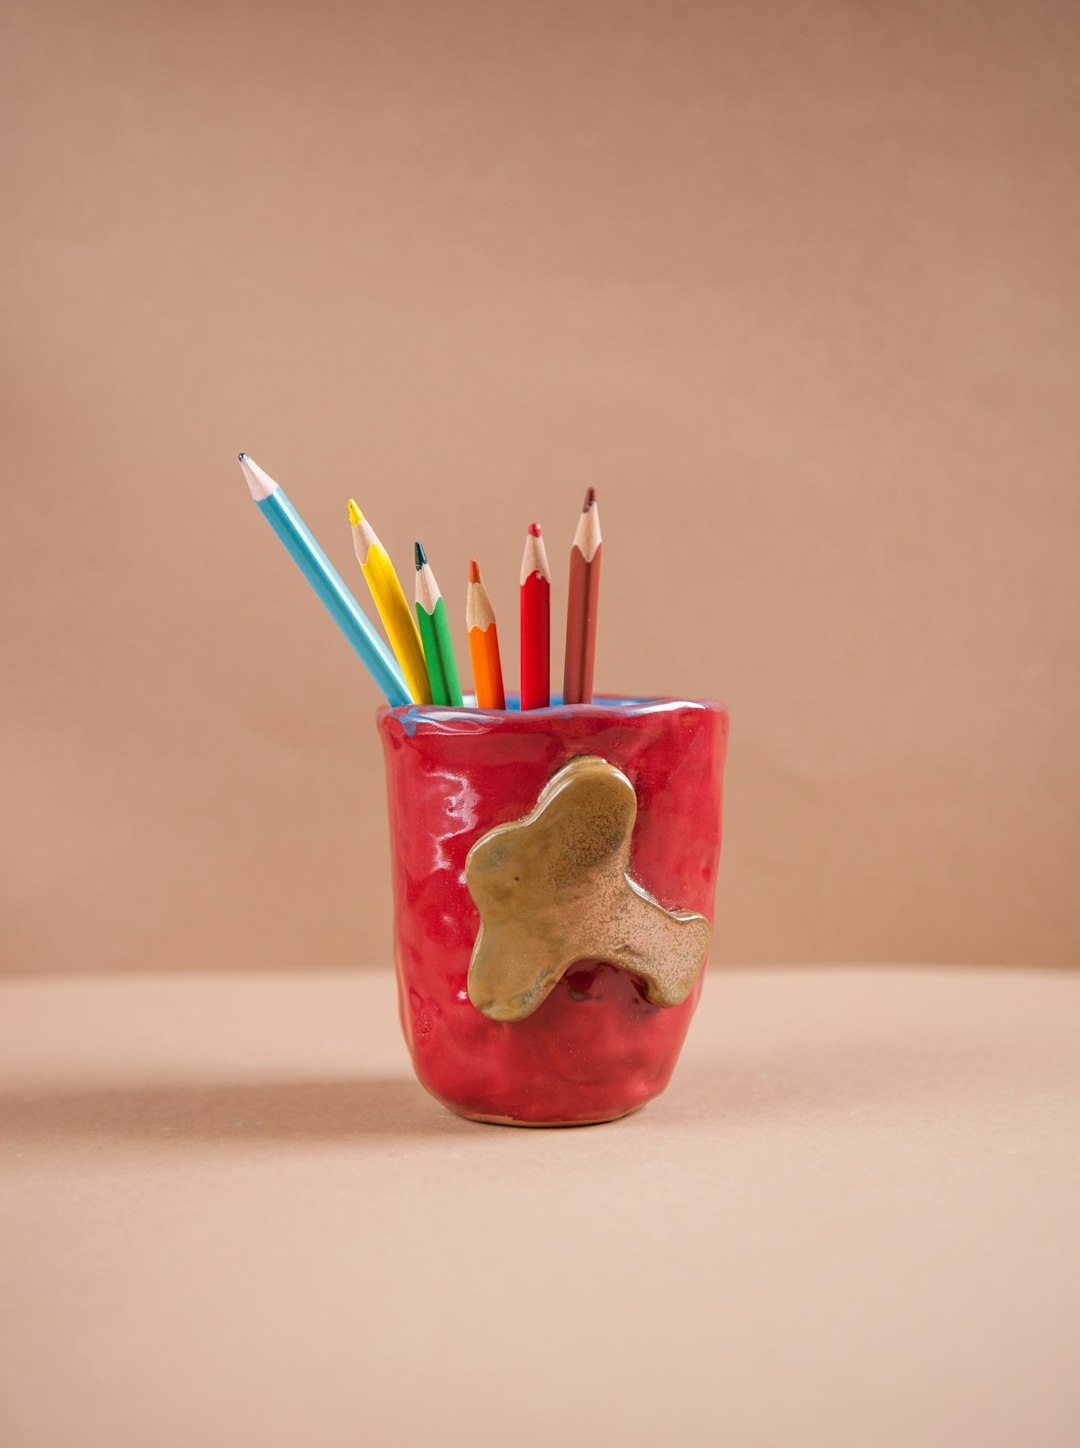 red and green ceramic mug with pencils